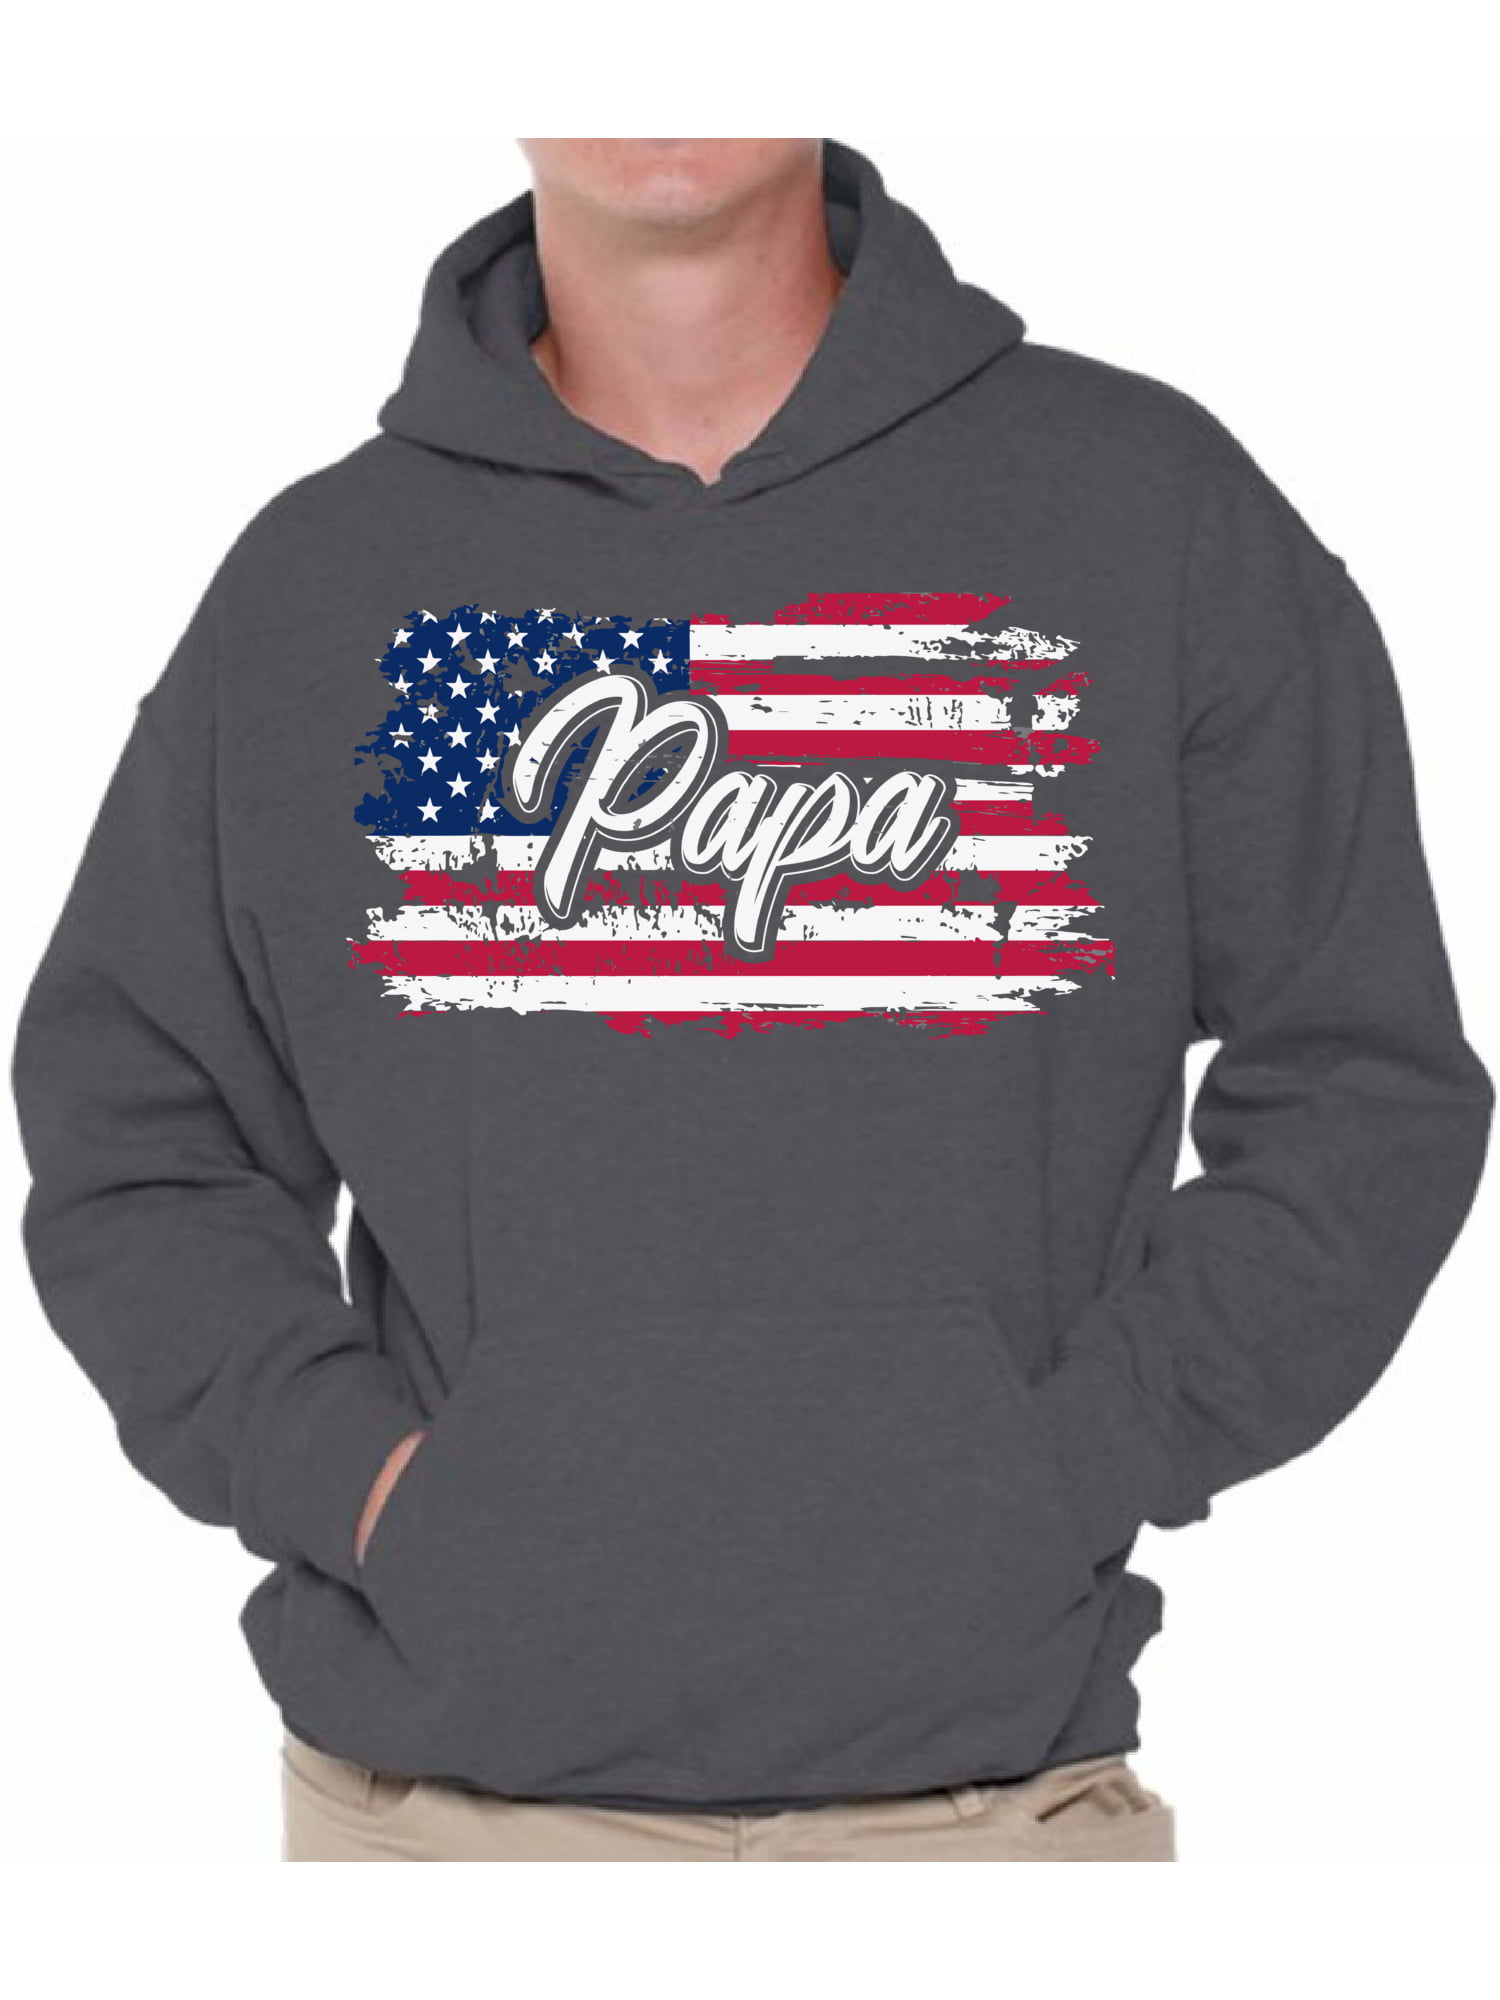 Awkward Styles Unisex USA Flag Eagle Patriotic Hoodie Hooded Sweatshirt Independence Day Gift 4th of July 